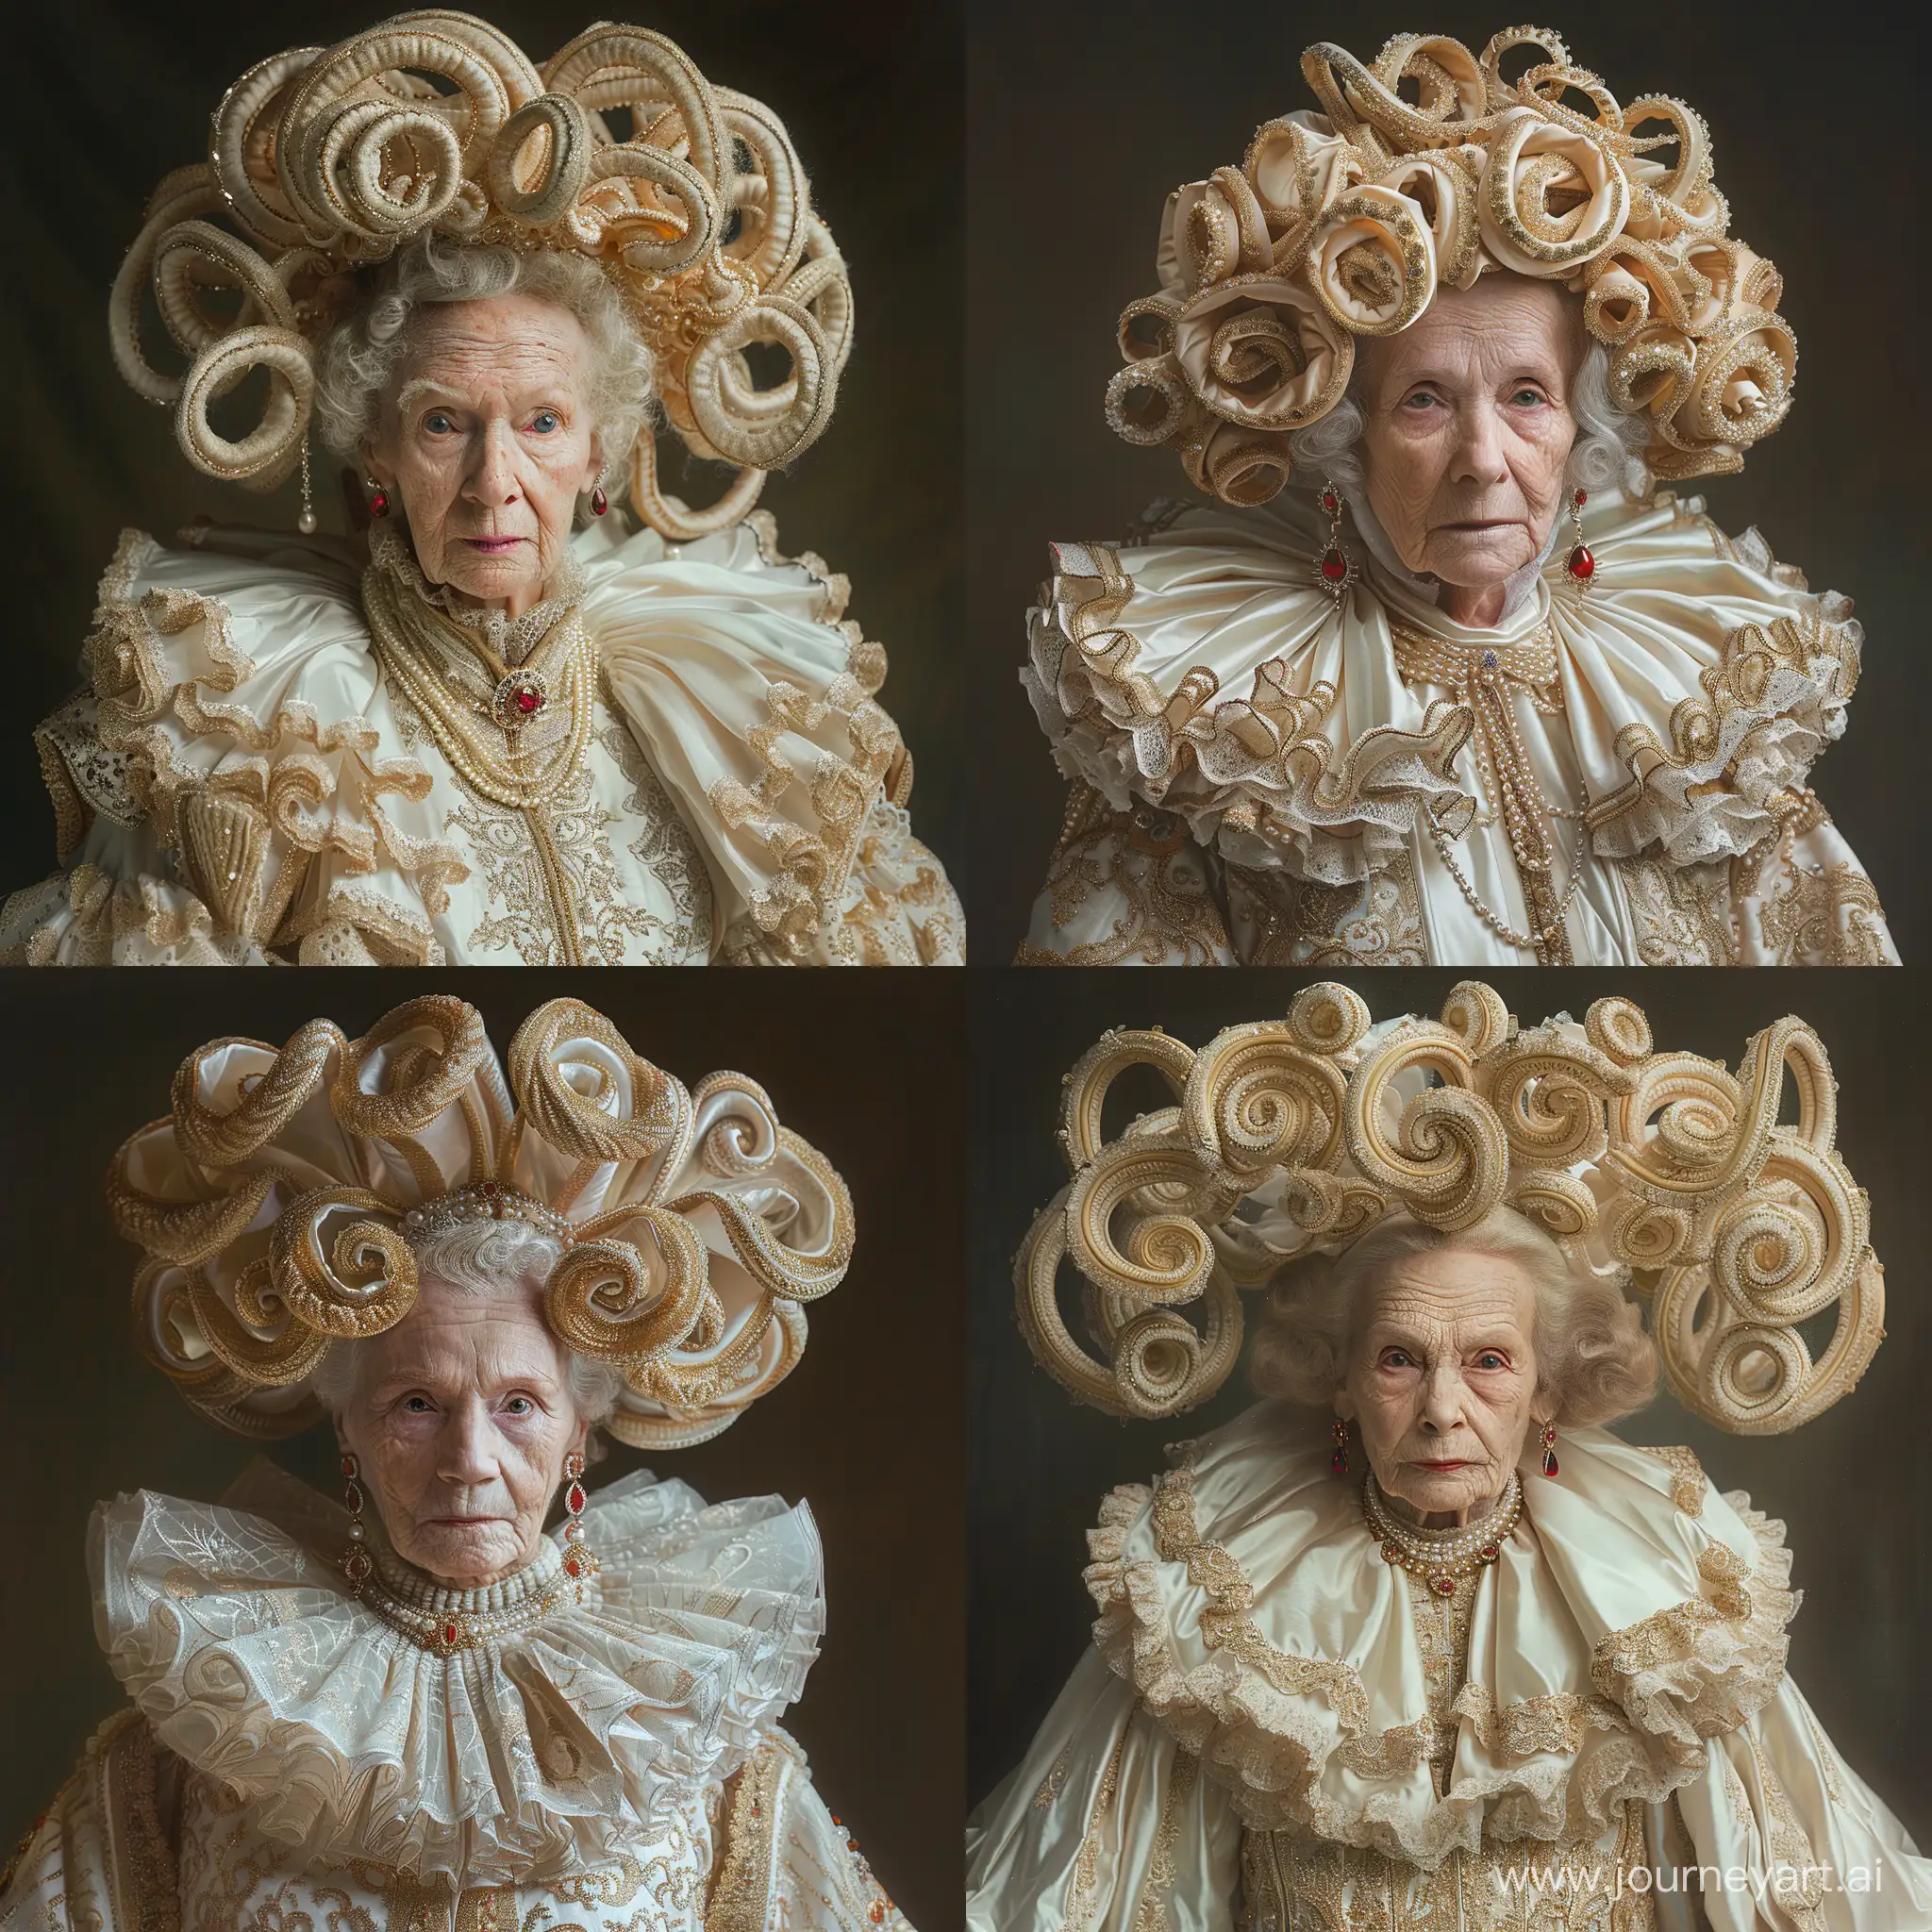 painting a old woman dressed in an elaborate and ornate costume reminiscent of European aristocracy or royalty from a historical period, possibly the Renaissance or Victorian era. The attire includes a high-collared ruffled garment adorned with lace and golden embroidery. The person is wearing a large, ornate headdress made of what looks like white satin, with many loops and twists creating a voluminous structure atop their head. These loops are additionally decorated with pearls and what appears to be a jeweled brooch, giving off an impression of opulence.

The individual has fair skin and is gazing directly at the viewer with a serious and somewhat intense expression. Their hair is styled in tight golden curls which complement the headdress. Jewelry is prominent; they wear large, dangling earrings with red gems and a necklace that drapes around the neck, adding to the regal appearance. The overall styling and attire suggest a deliberate portrayal of a historical figure or a conceptual representation of nobility, rather than an actual current-day fashion statement. The dark background contrasts sharply with the light and detailed costume, bringing the viewer's focus to the person and their attire --style raw --stylize 750 --v 6